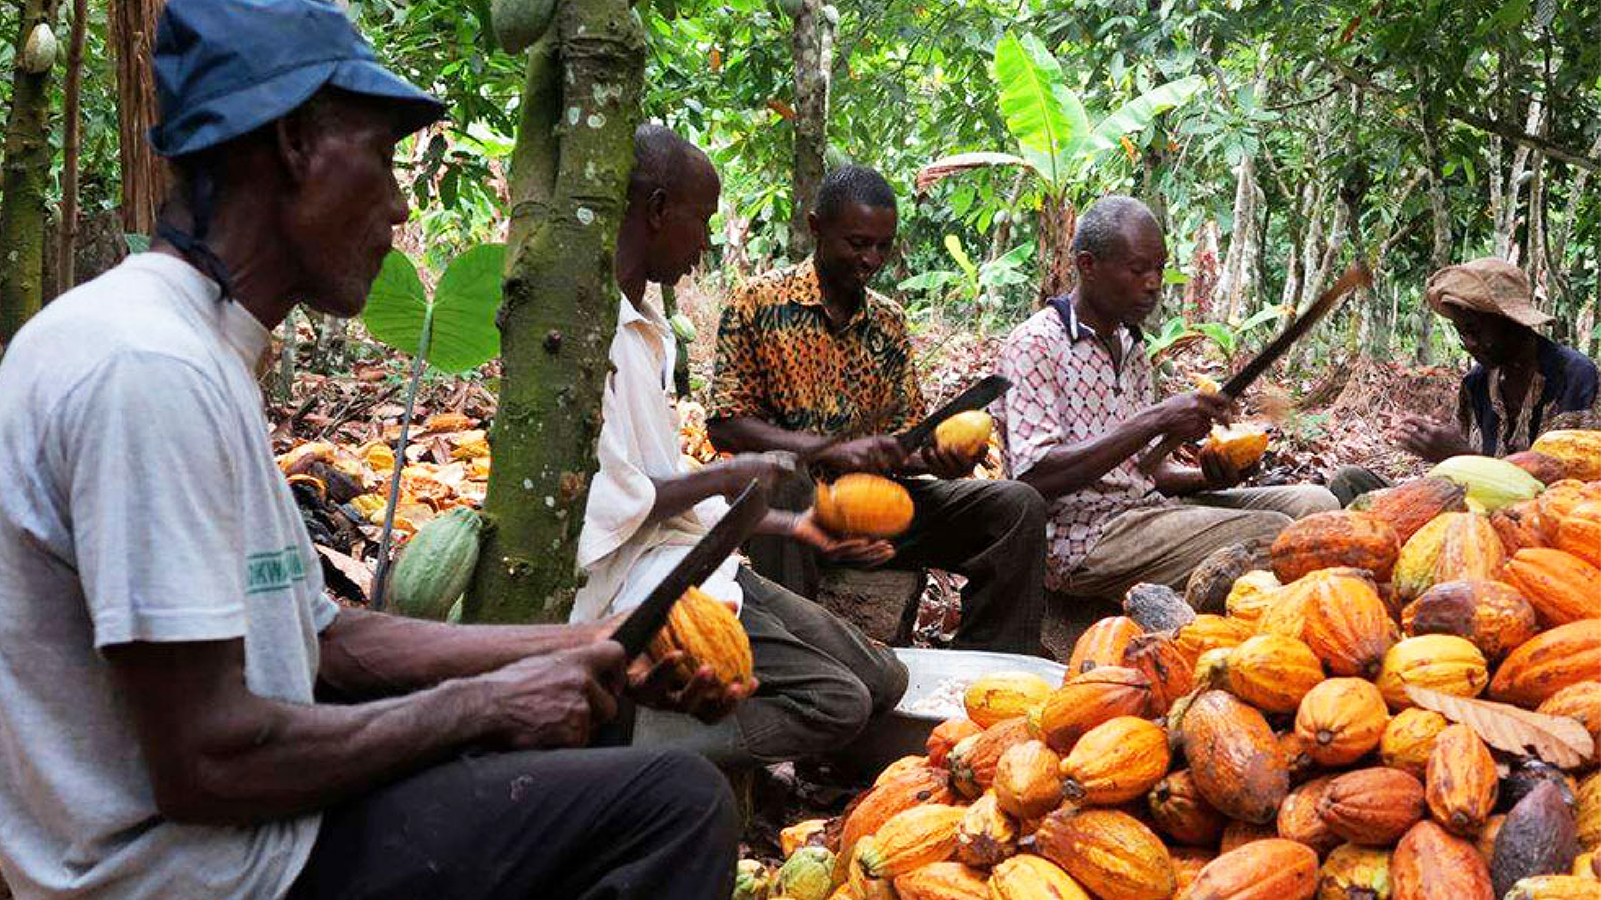 Ghana’s Cocoa Processing Company faces privatization in bid to boost competitiveness